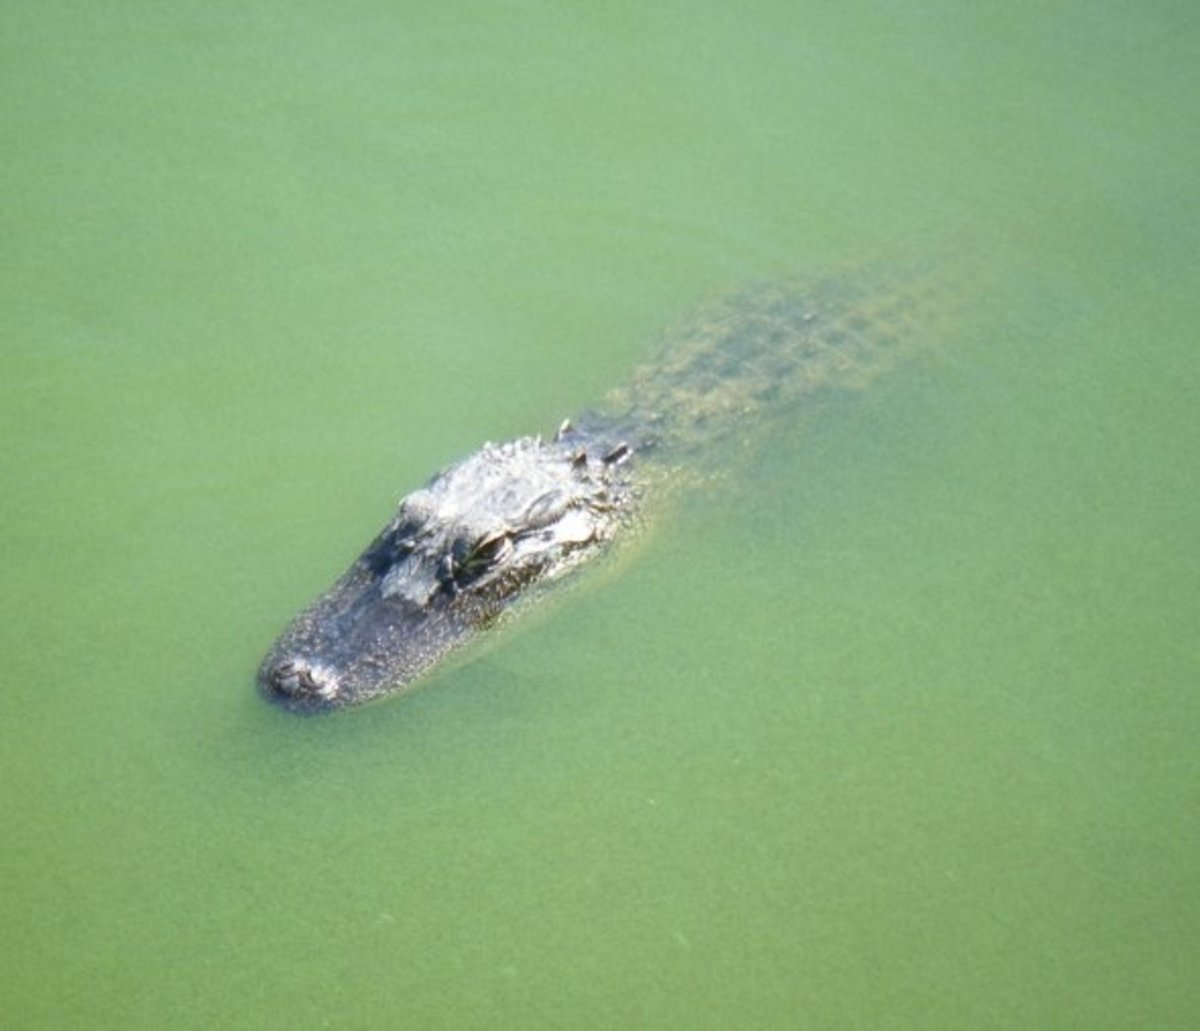 An alligator swimming in Lake Alice, Gainesville, Florida.  Alligators have an exceptionally powerful bite.  They are naturally timid by nature, however, especially when compared with crocodiles, which tend to be more aggressive towards humans.